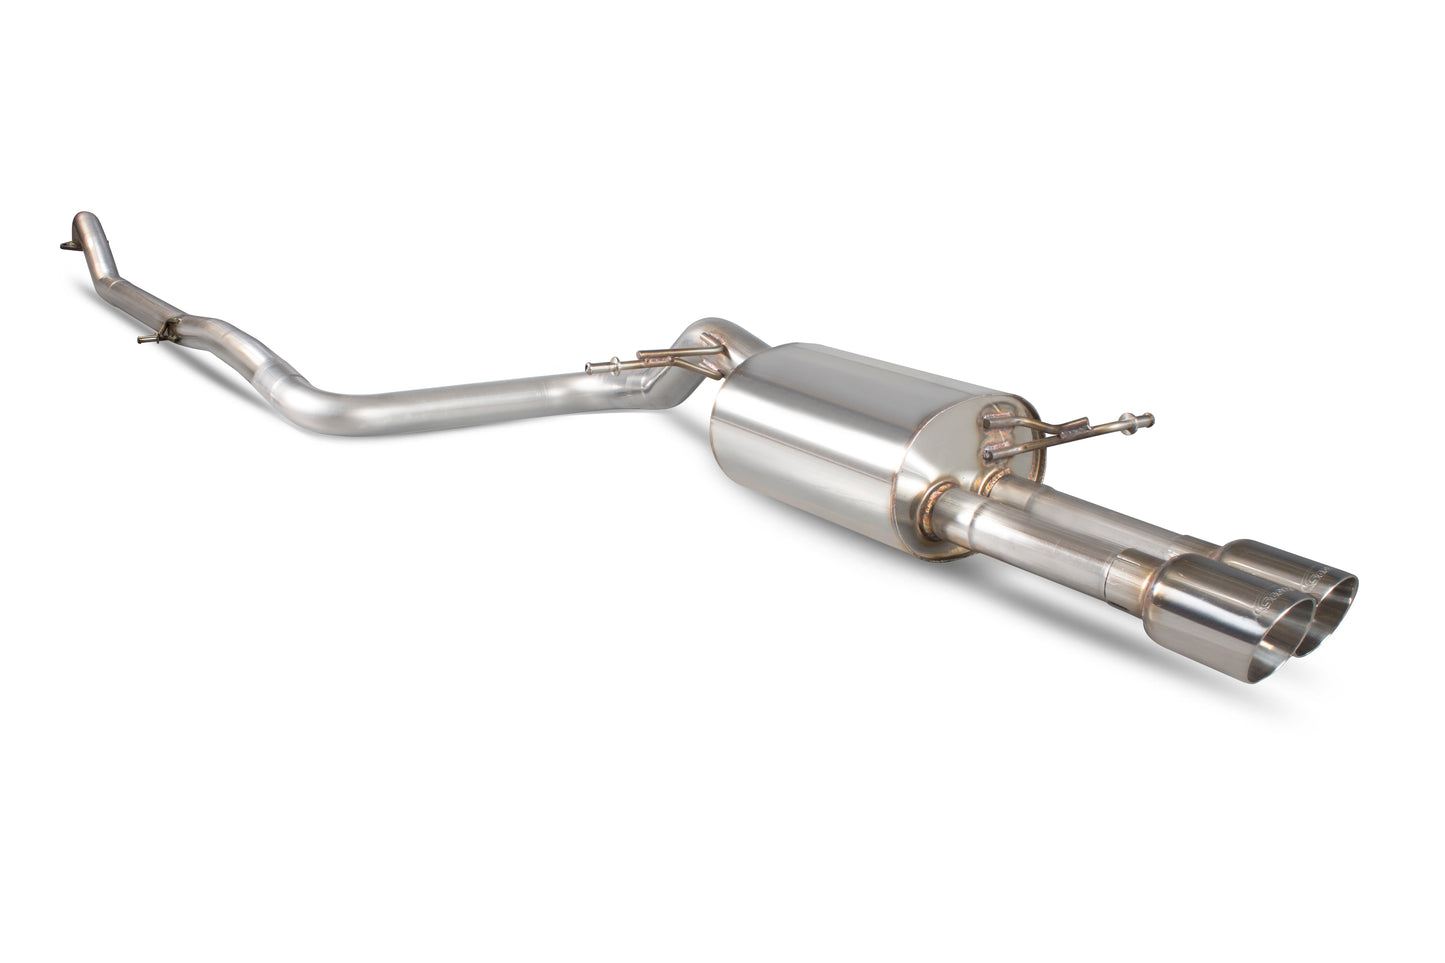 Scorpion Non-Res Cat Back Exhaust - Ford Fiesta Ecoboost 1.0T/ST Valance 13-17